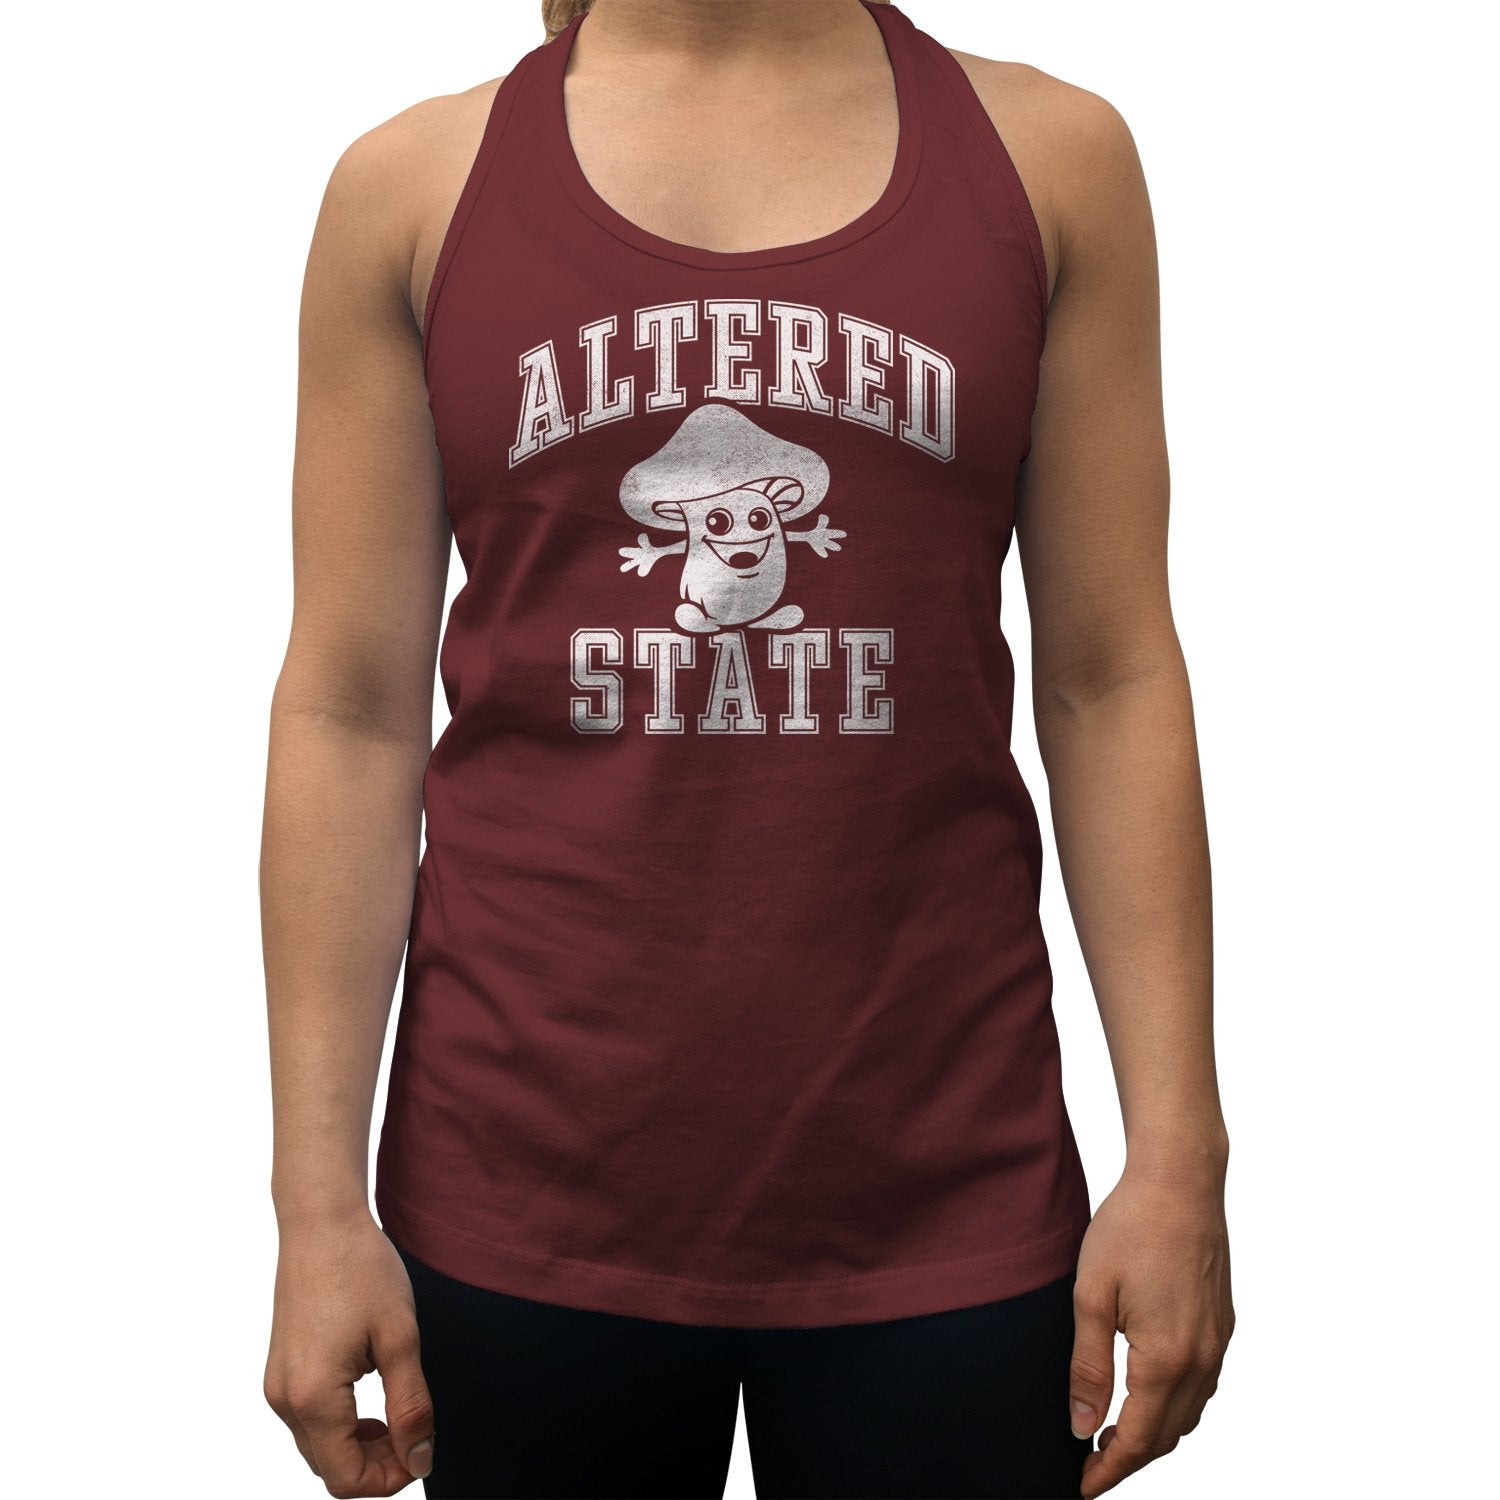 Women's Altered State Racerback Tank Top